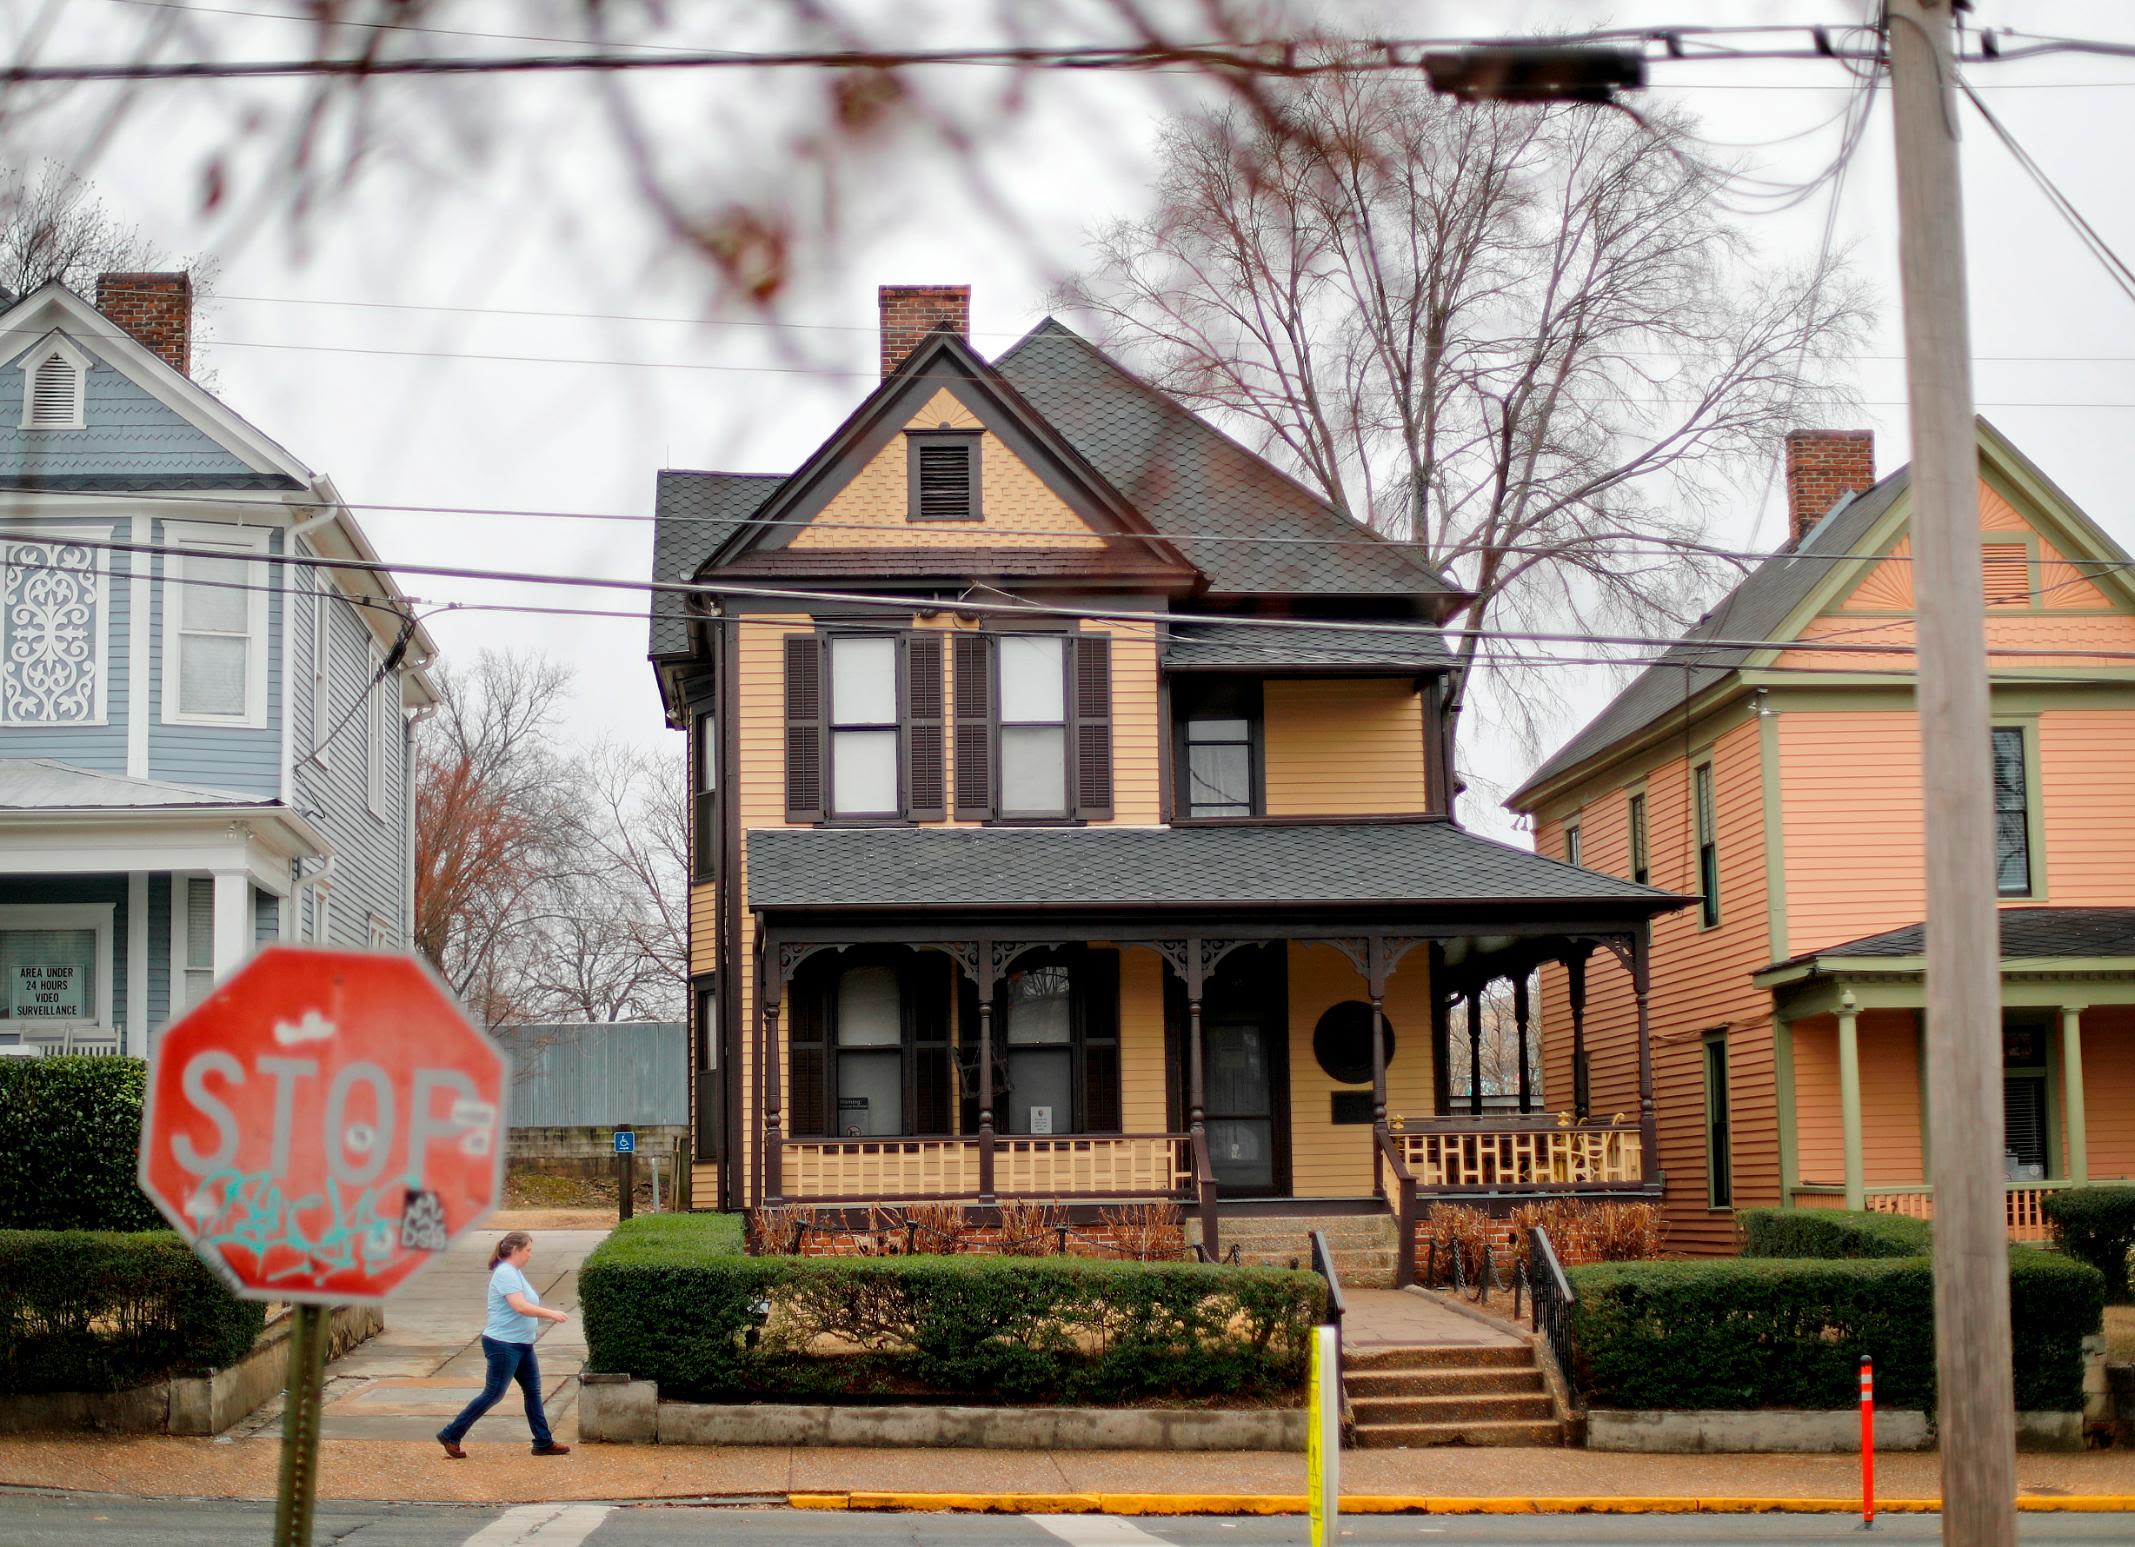 9 places where you can walk in MLK Jr.'s footsteps